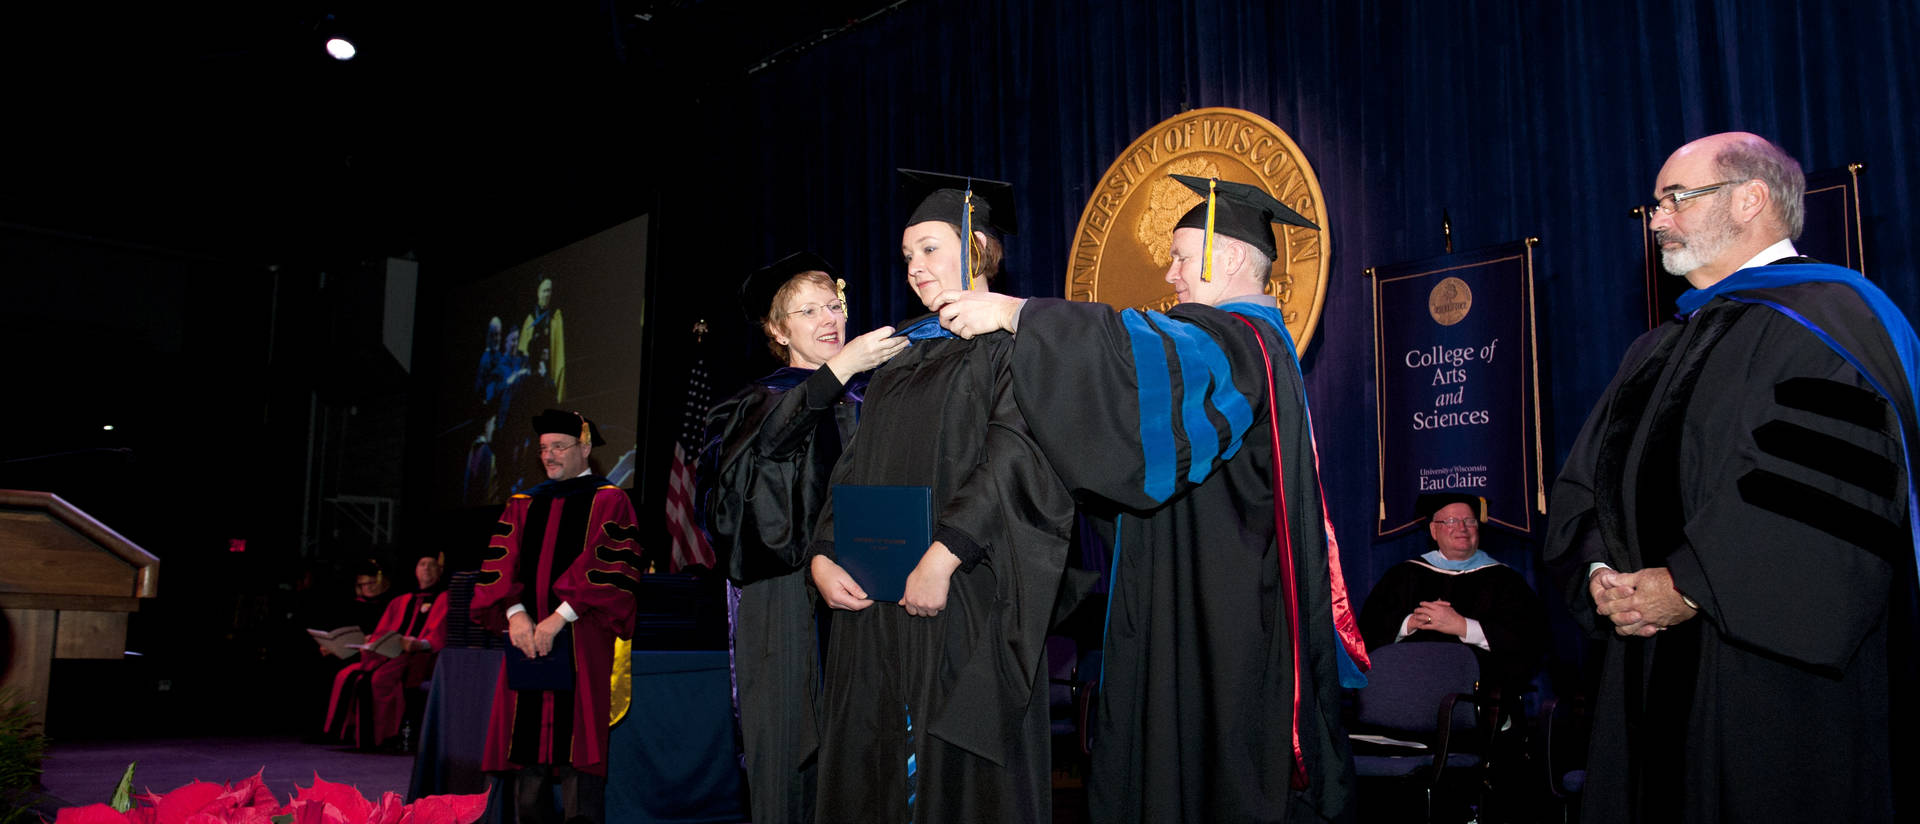 COB MBA hooding at Commencement